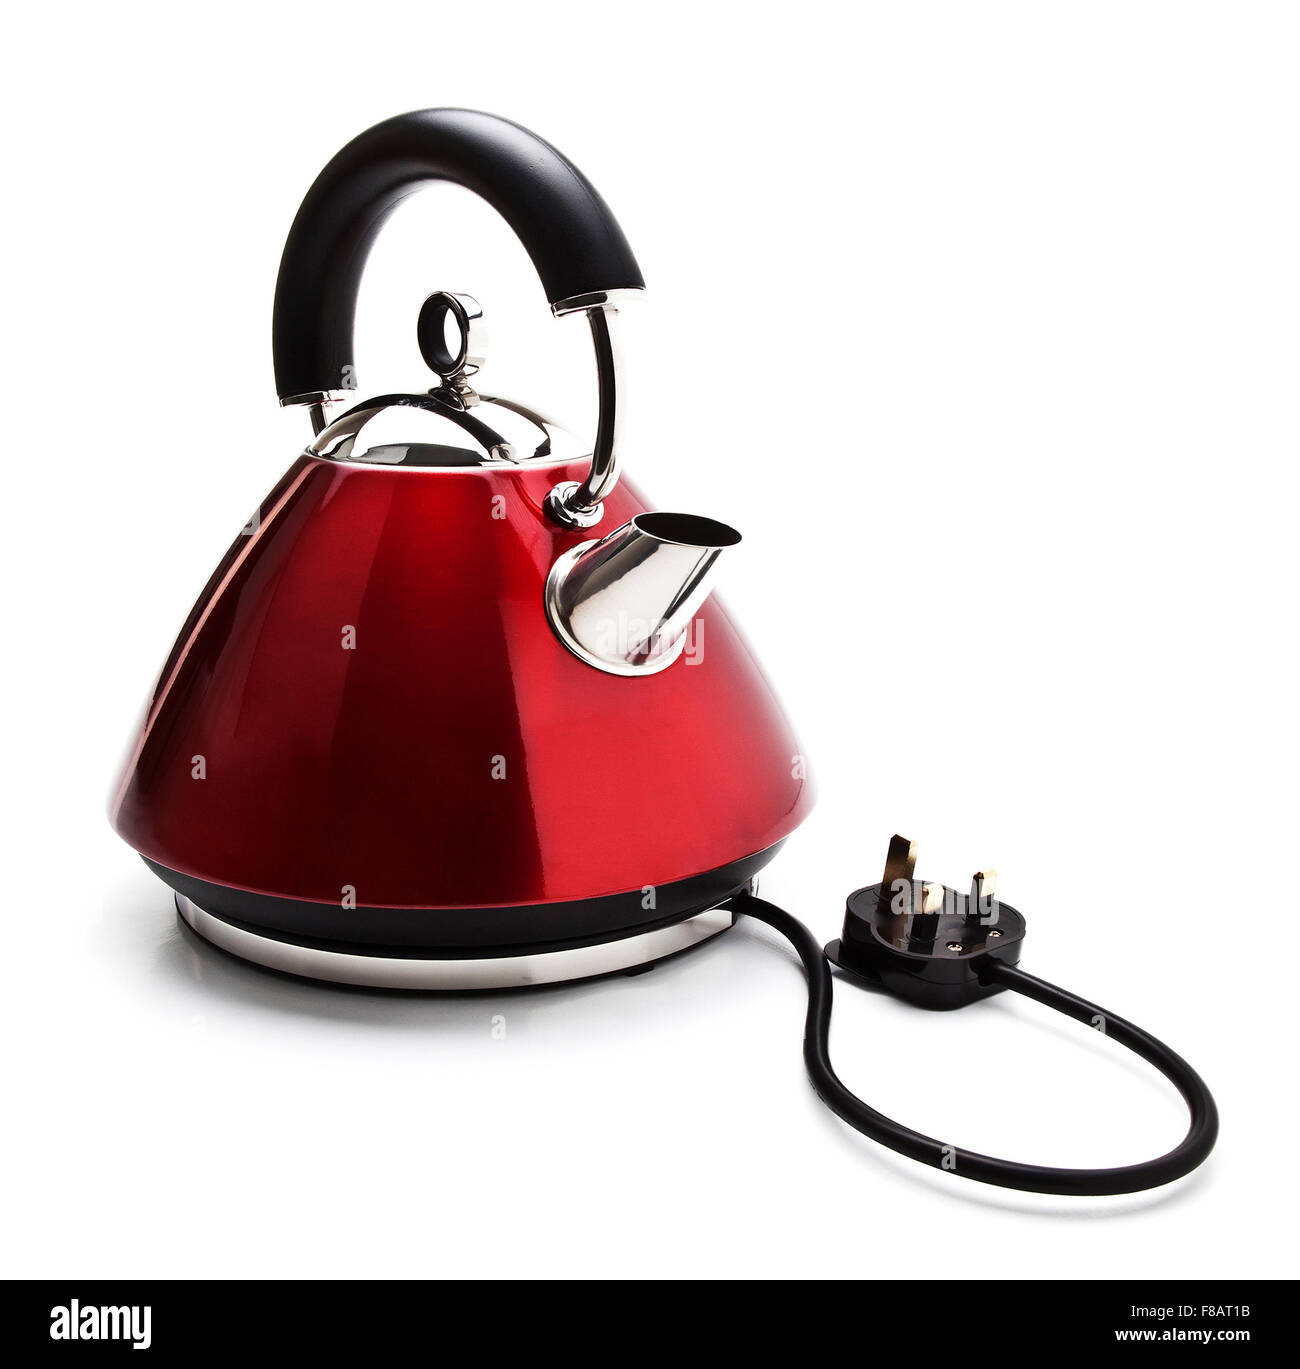 https://c8.alamy.com/comp/F8AT1B/red-electric-kettle-isolated-on-white-background-F8AT1B.jpg